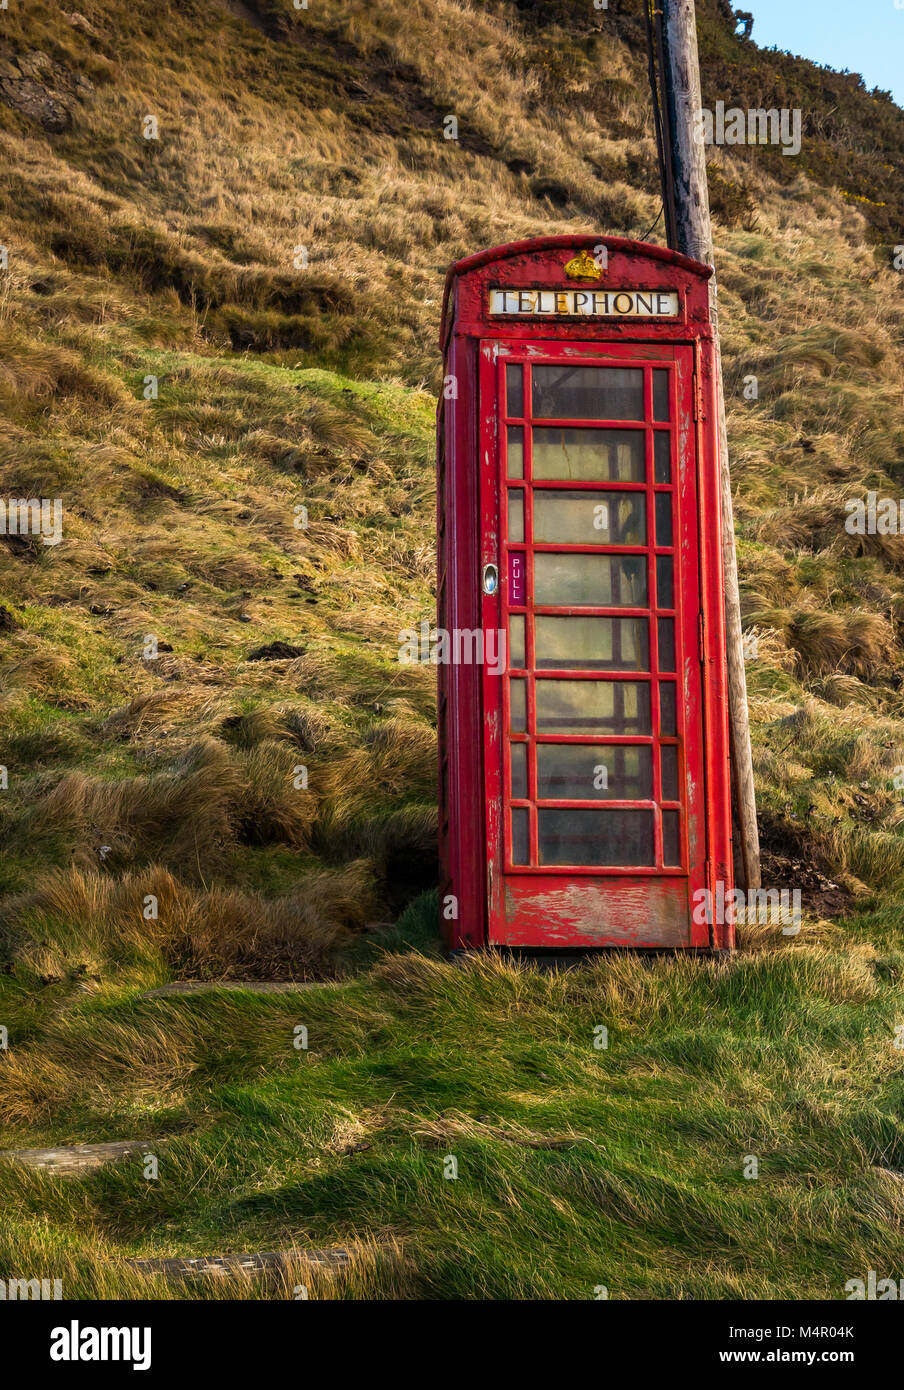 Old neglected Brisith red telephone box, still in working order in small seaside village, Crovie, Aberdeenshire, Scotland, UK Stock Photo